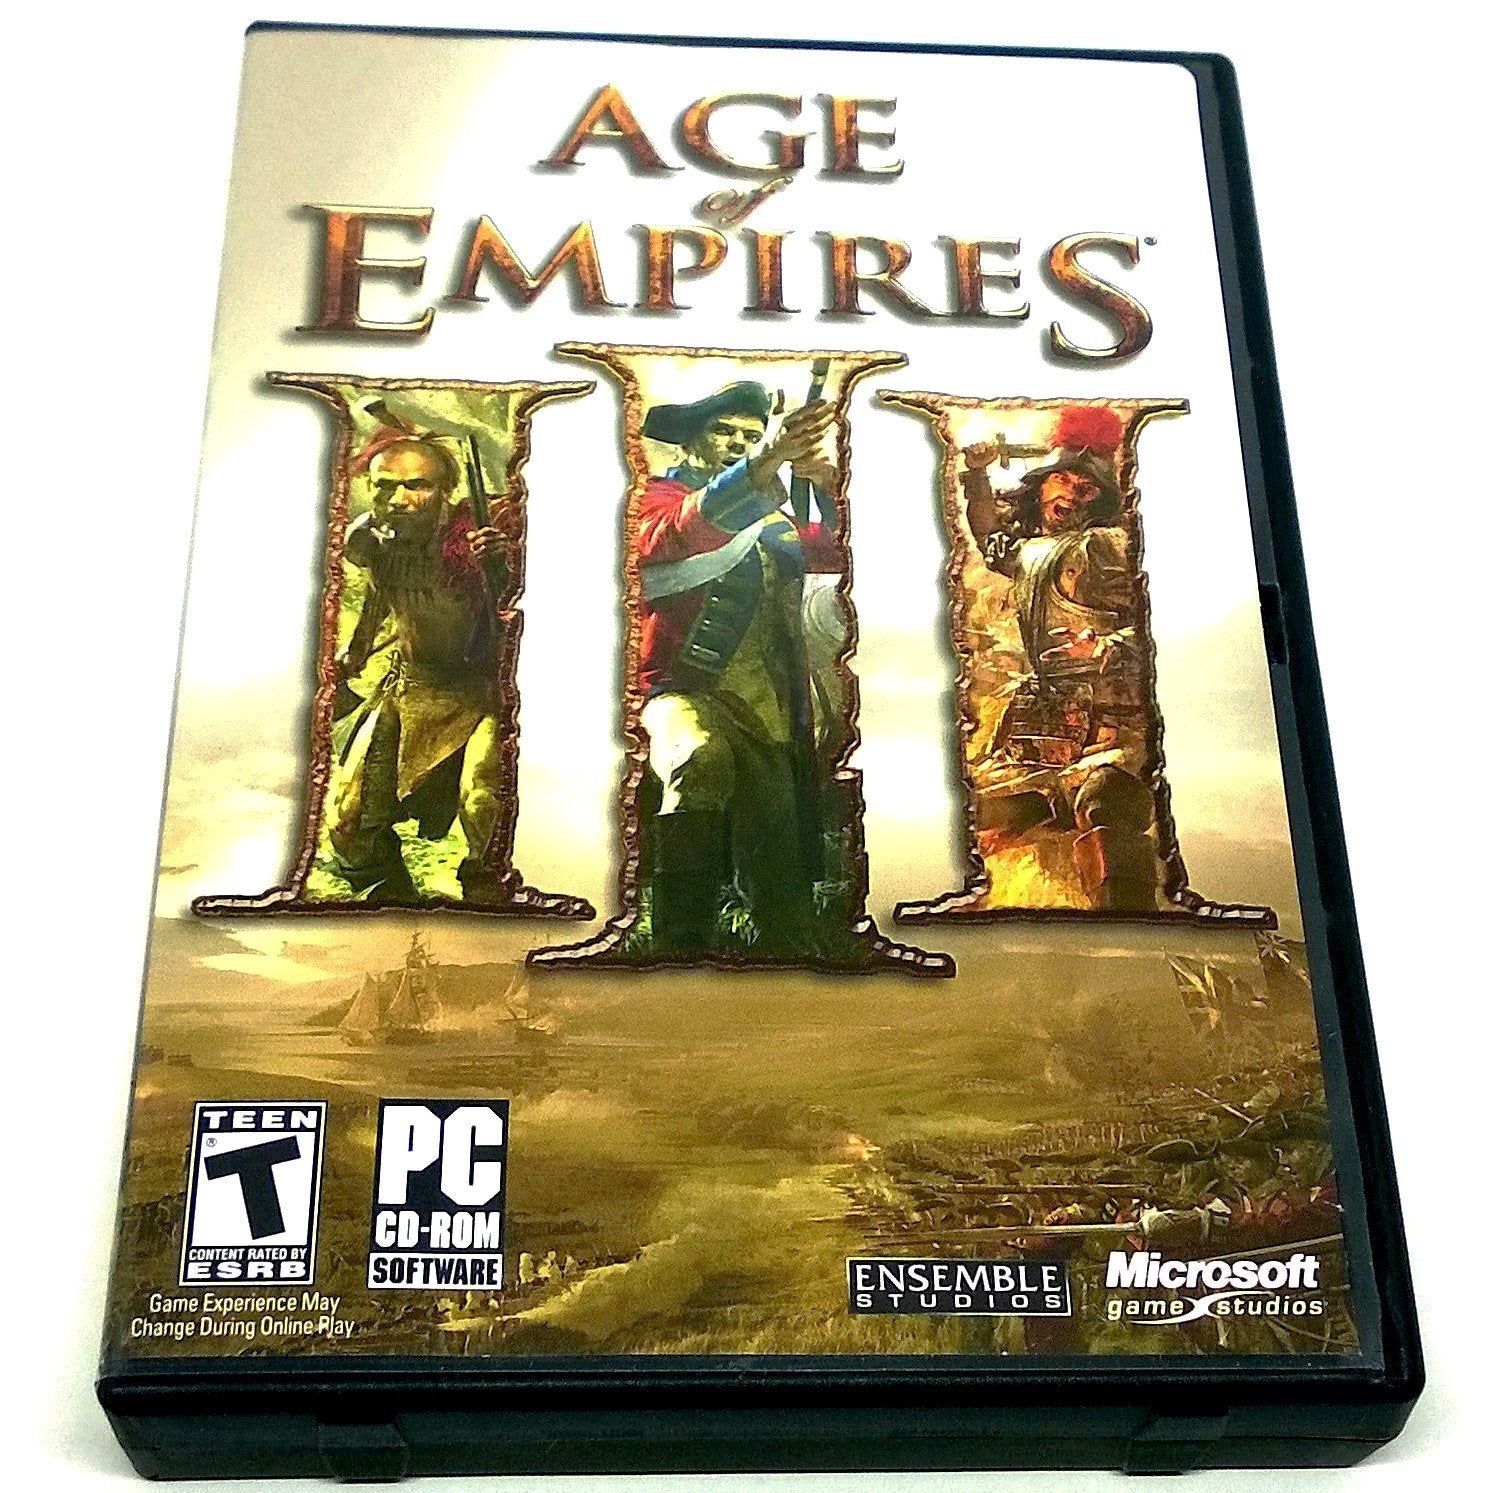 Age of Empires III for PC CD-ROM - Front of case